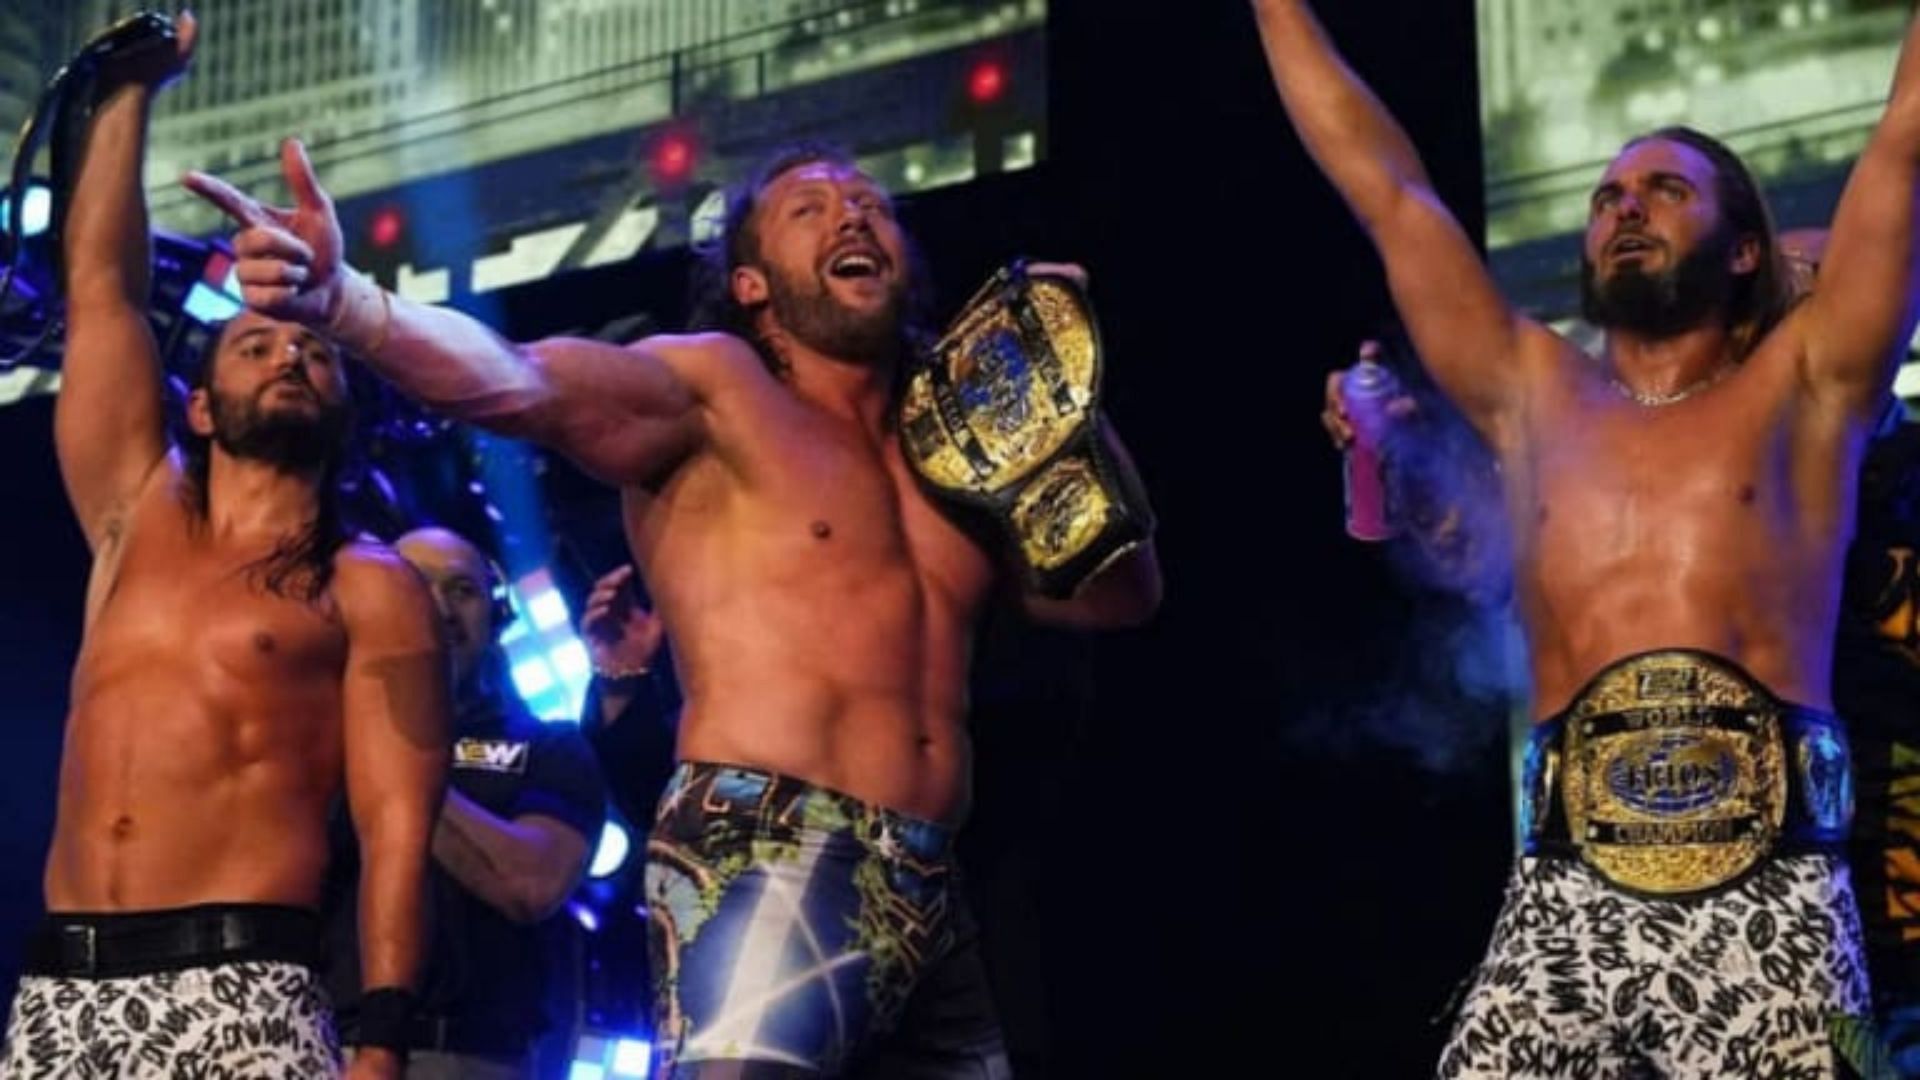 Kenny Omega and The Young Bucks could be on their way back in AEW